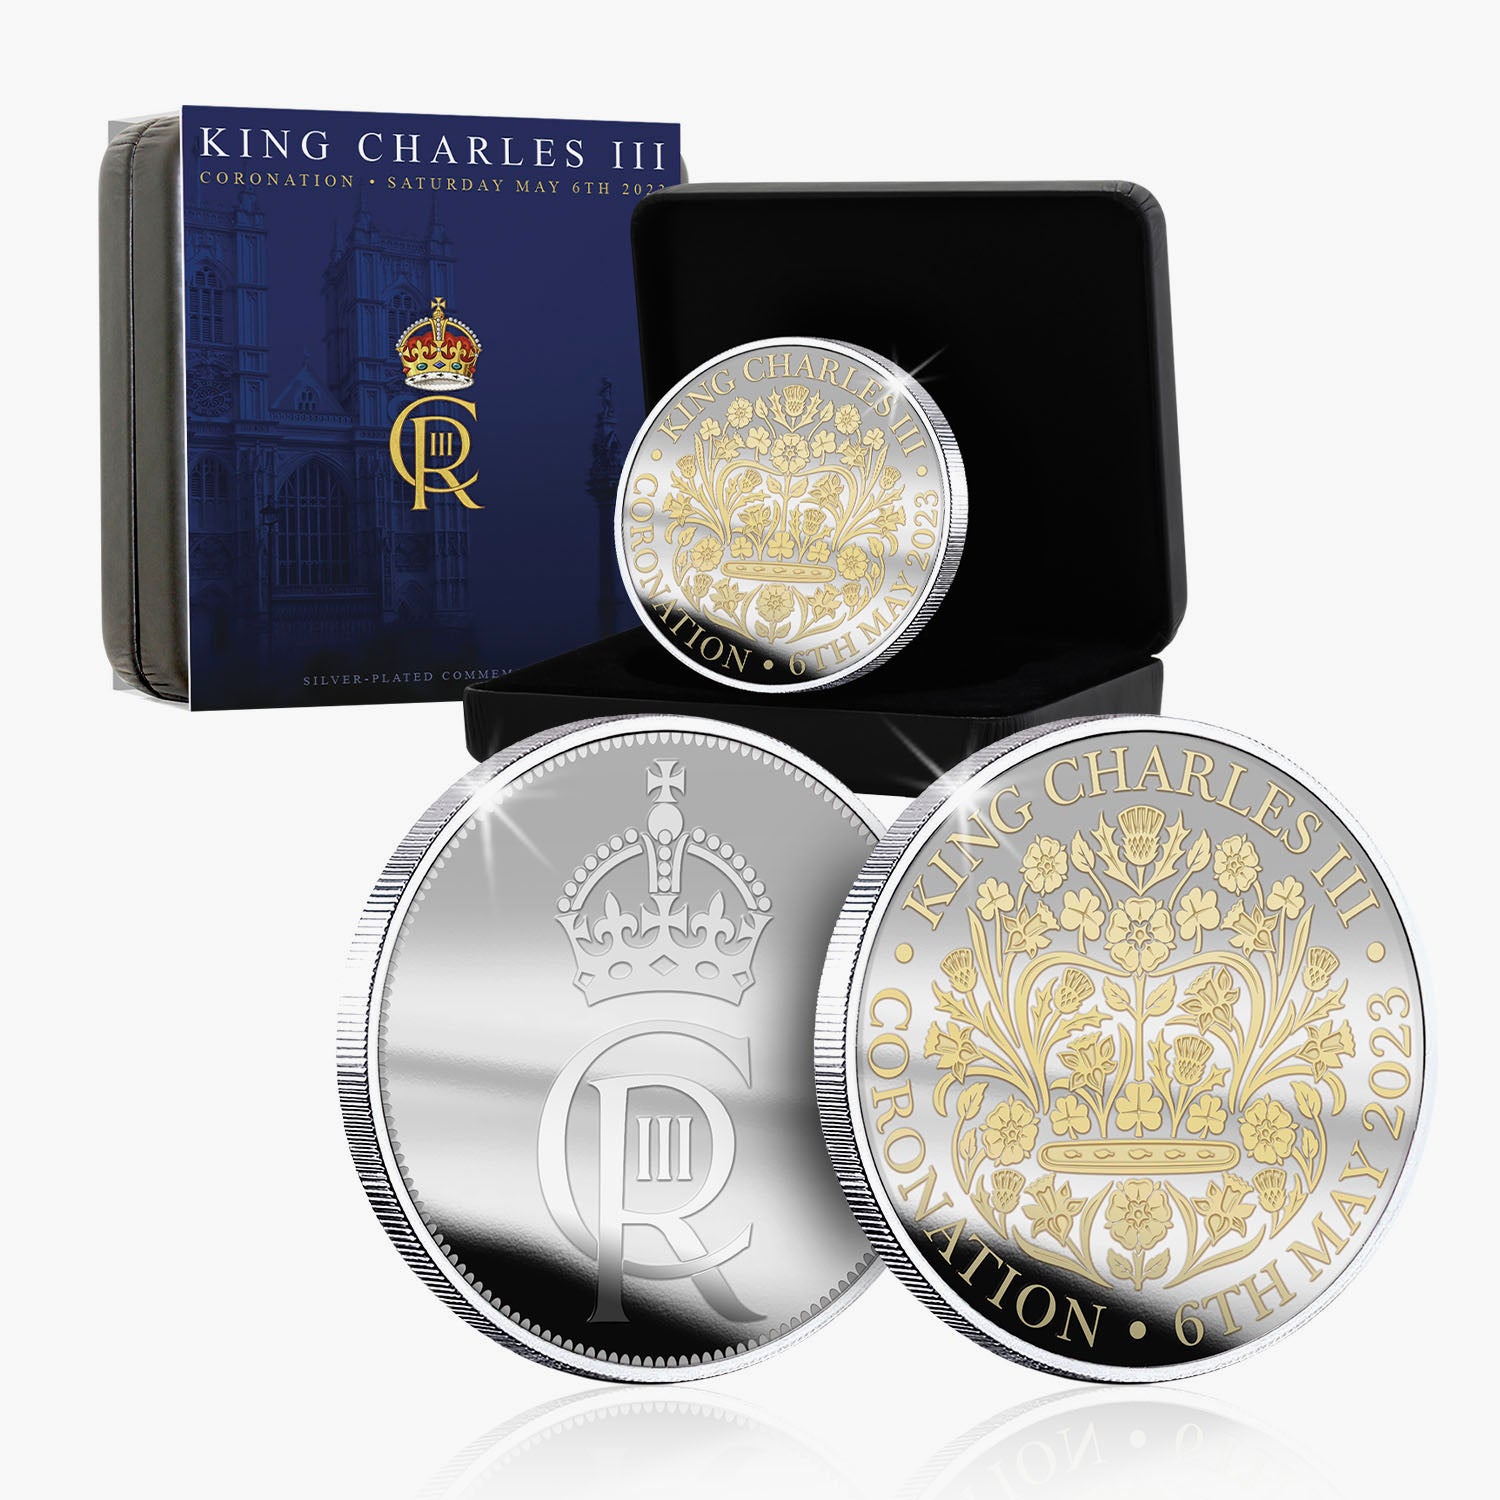 The Coronation of King Charles III Collectors Edition Commemorative